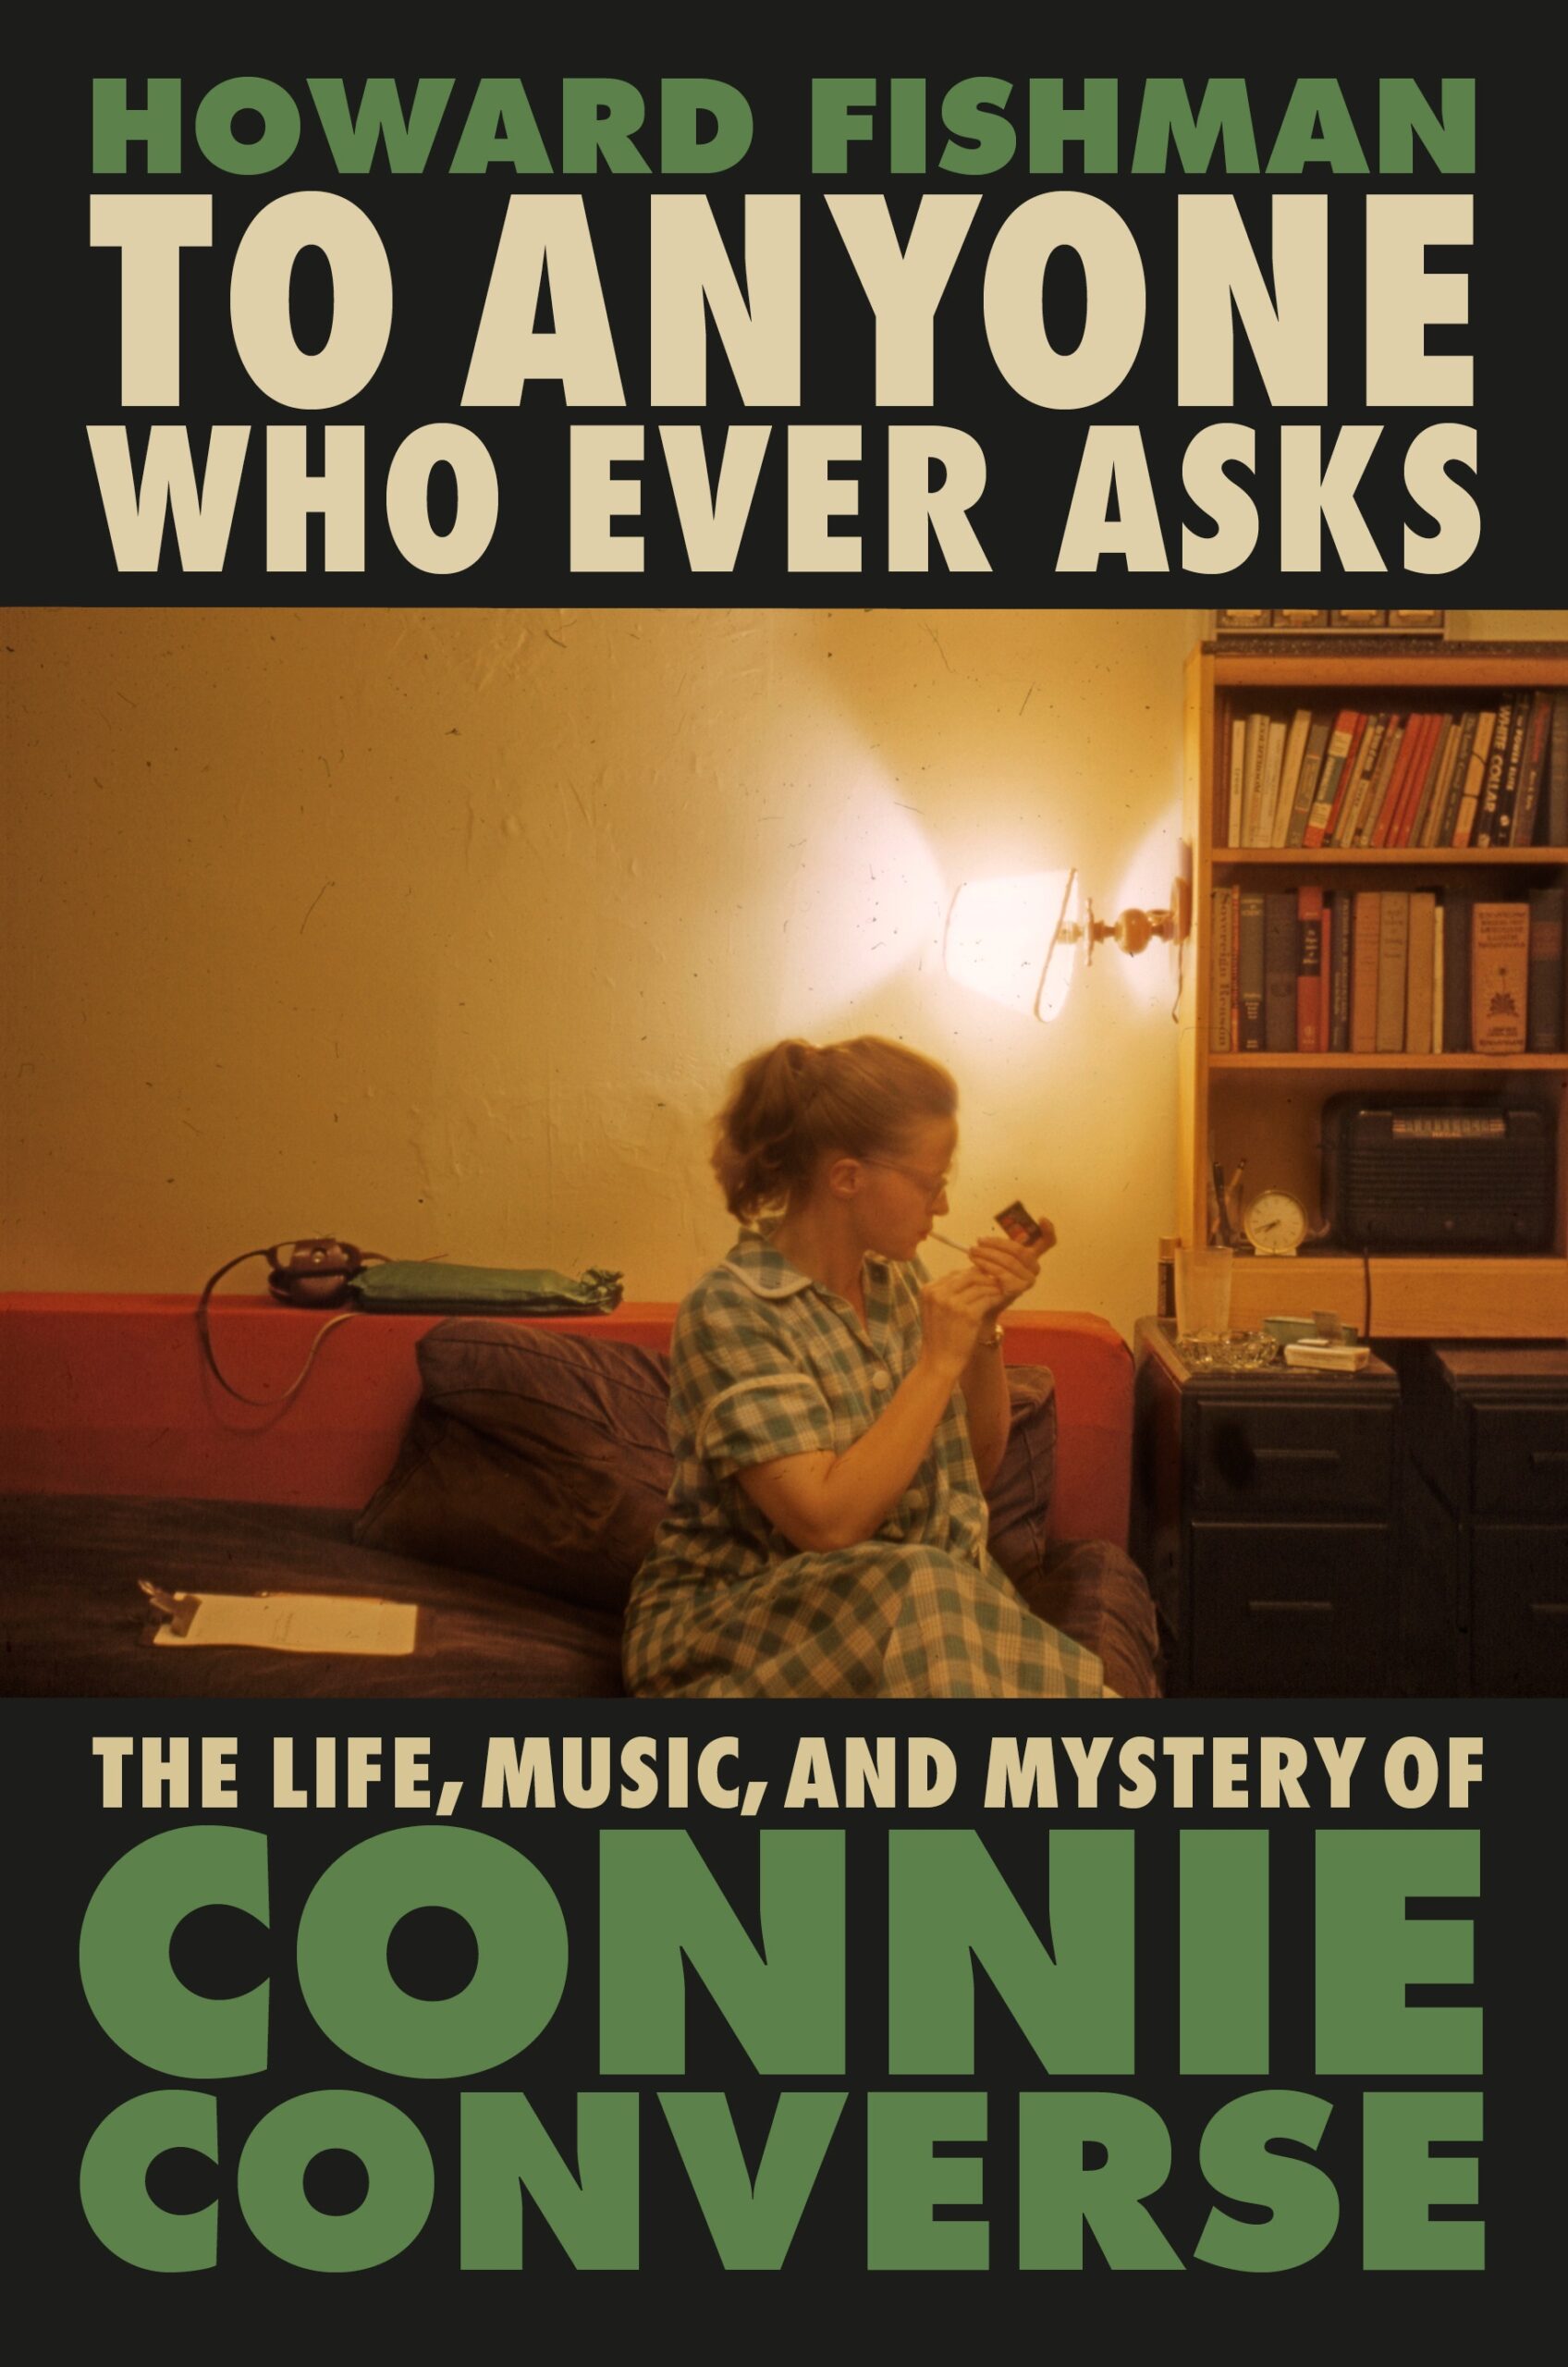 Book Launch: To Anyone Who Ever Asks by Howard Fishman in conversation with Dan Dzula